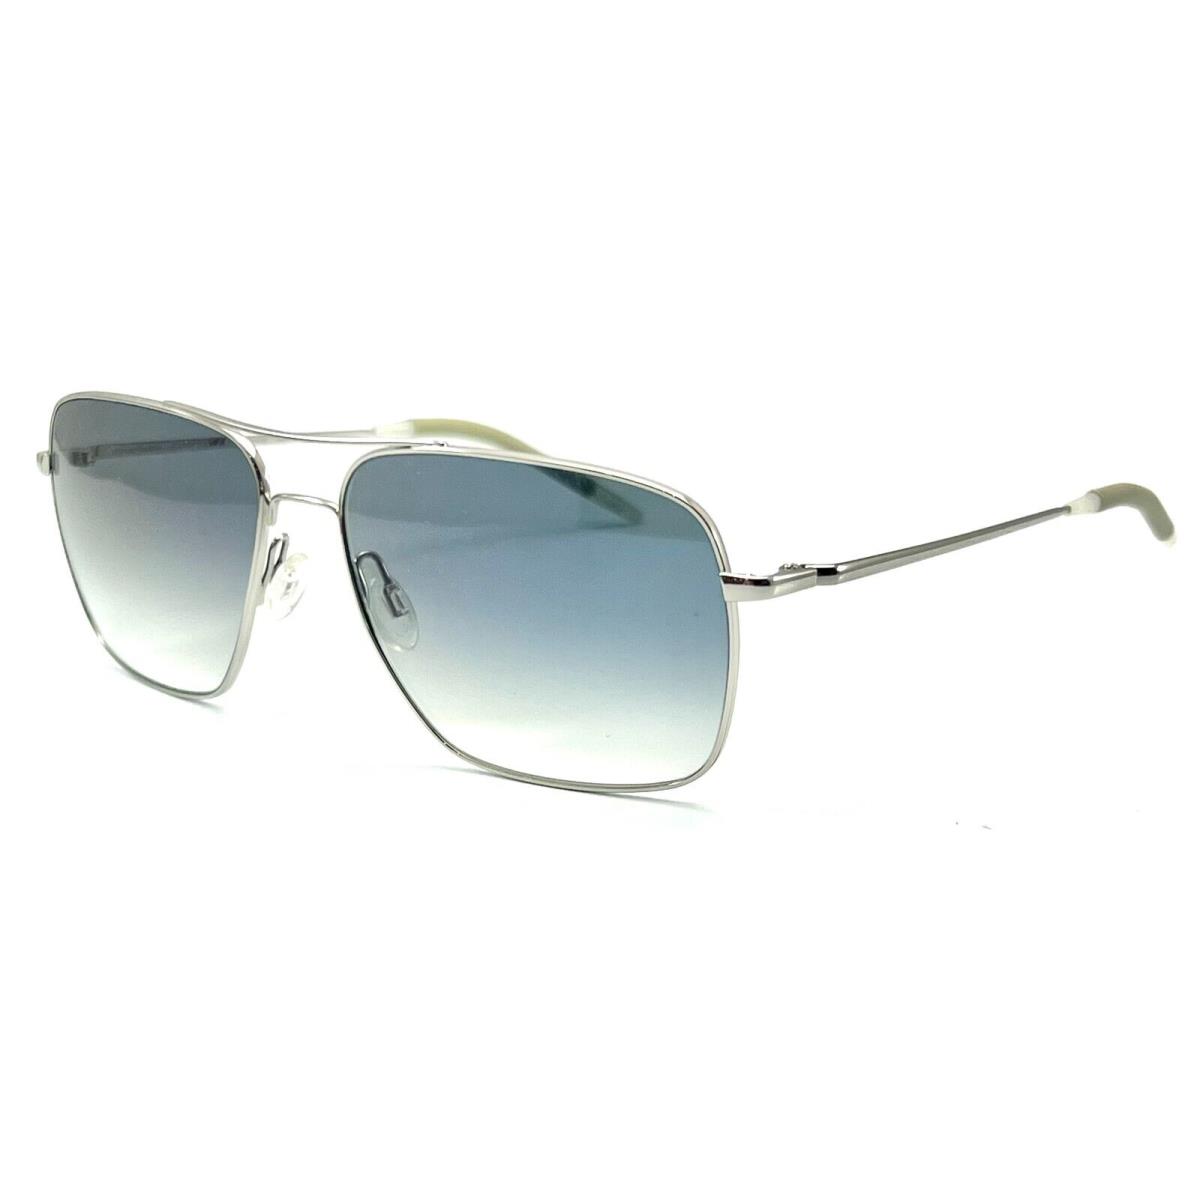 Oliver Peoples Clifton OV1150-S 5036/3F Silver Sunglasses 58-15 - Frame: Silver, Lens: Blue